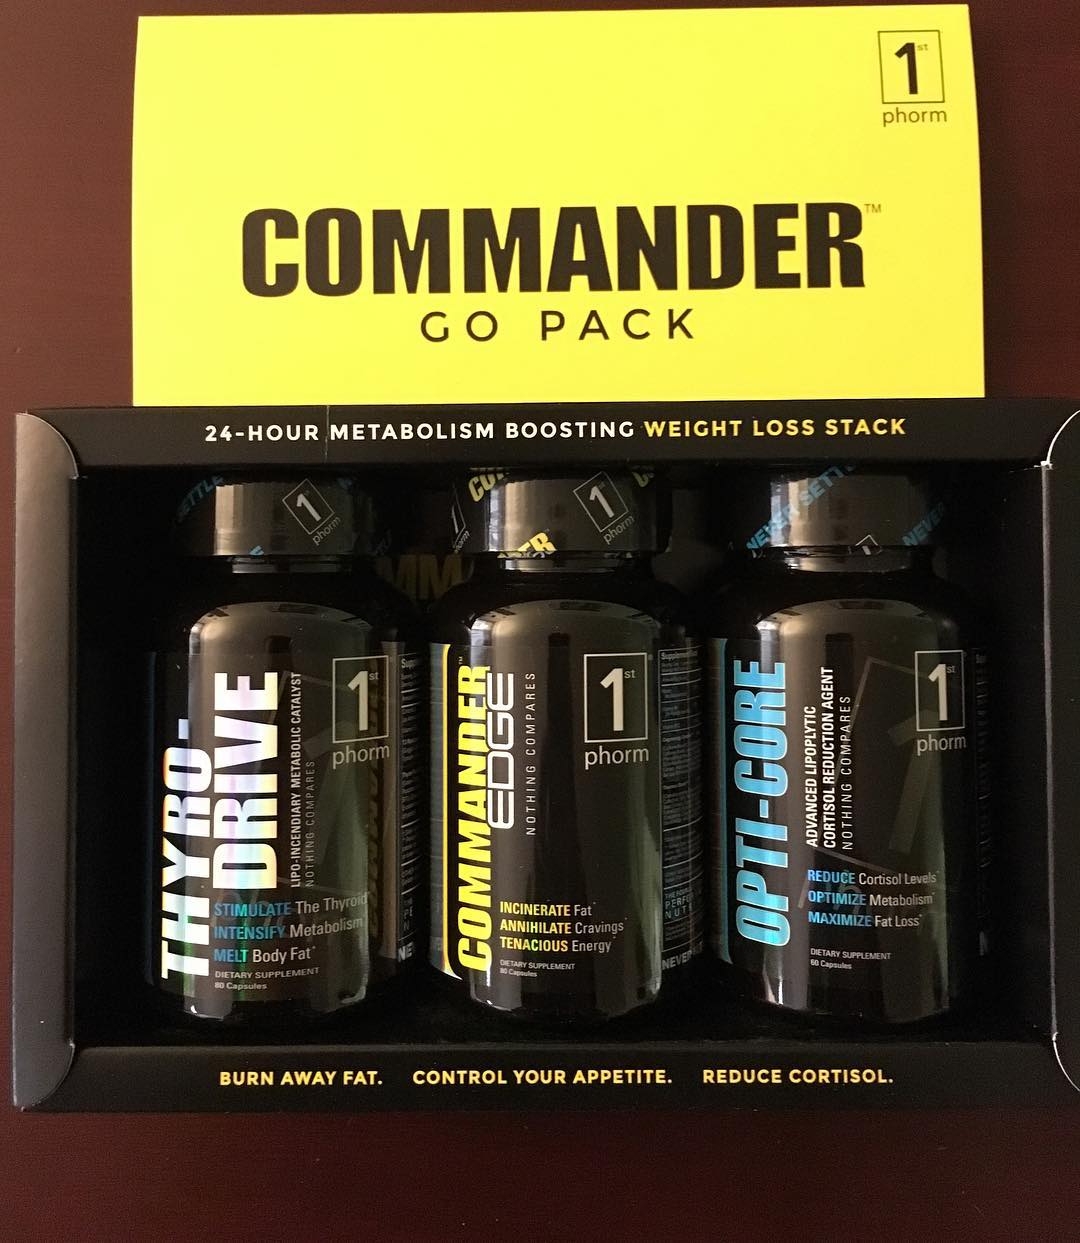 Commander Go Pack Product Supplements